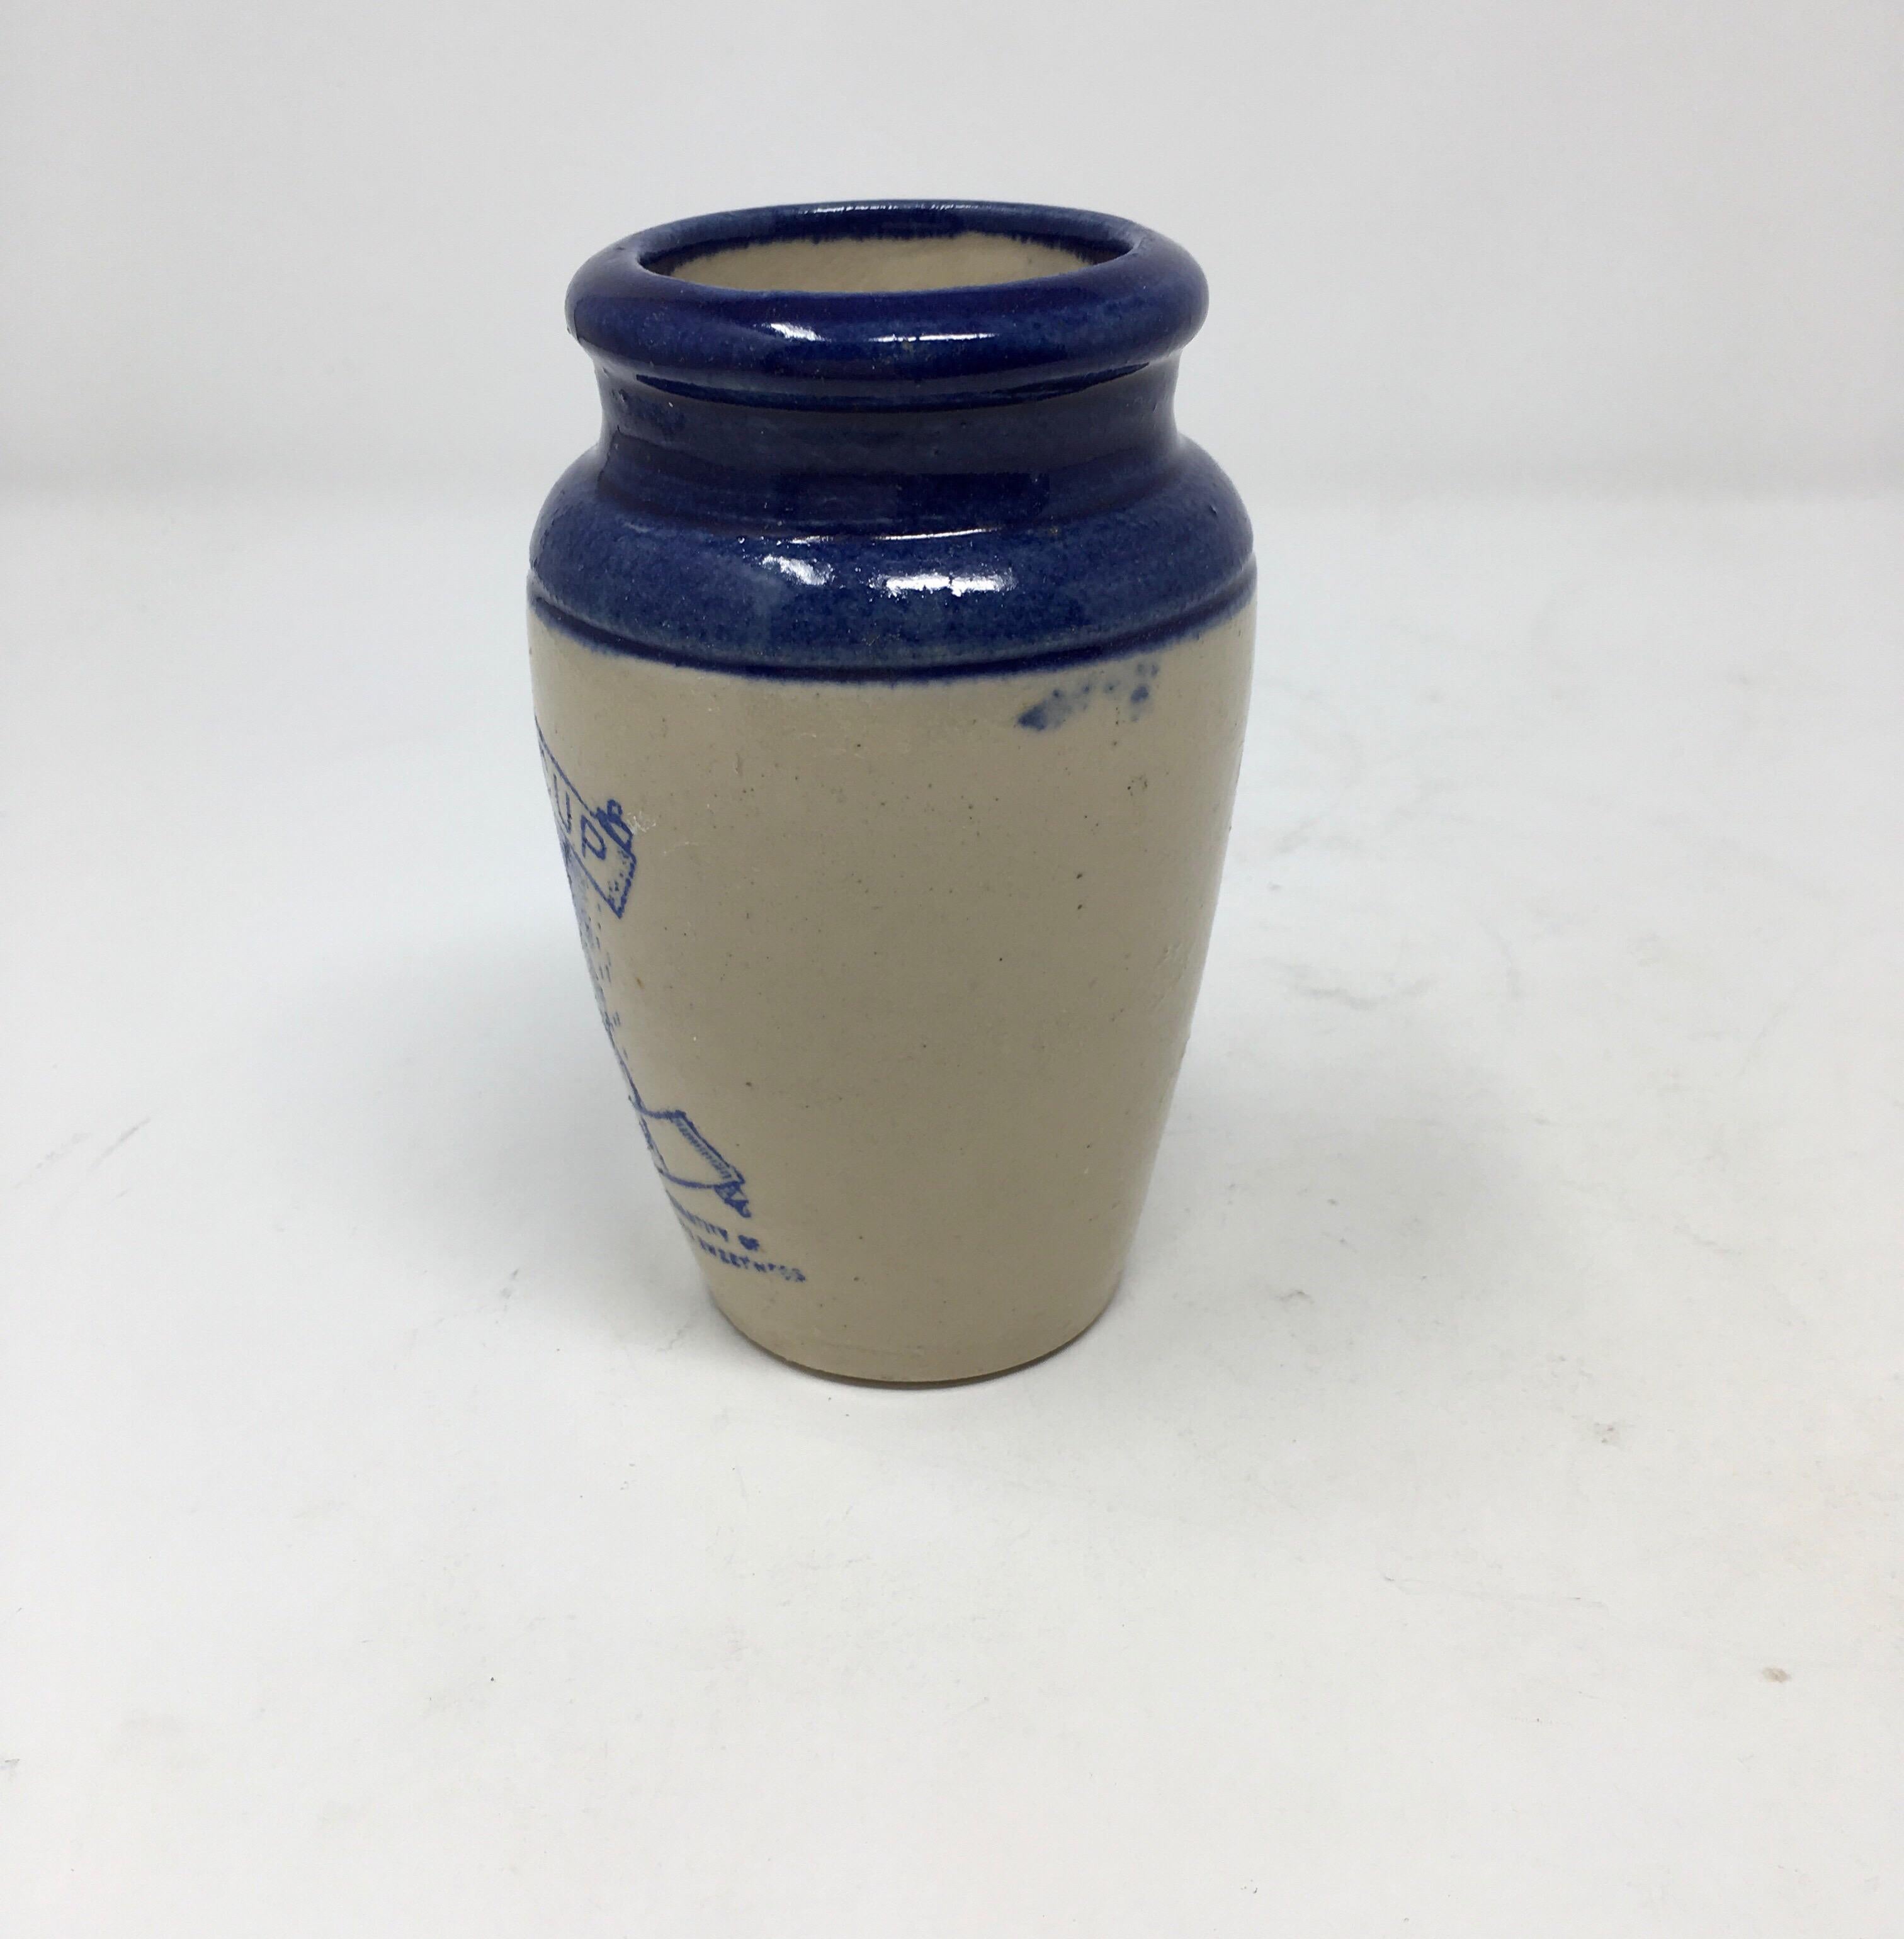 Found in England, this Scottish stoneware Buttercup cream advertising pot has a beautiful cobalt blue top, cobalt transfer print and a pictorial of a milk maid and cow. The pot measures approx. 5 inches high and is in good condition.